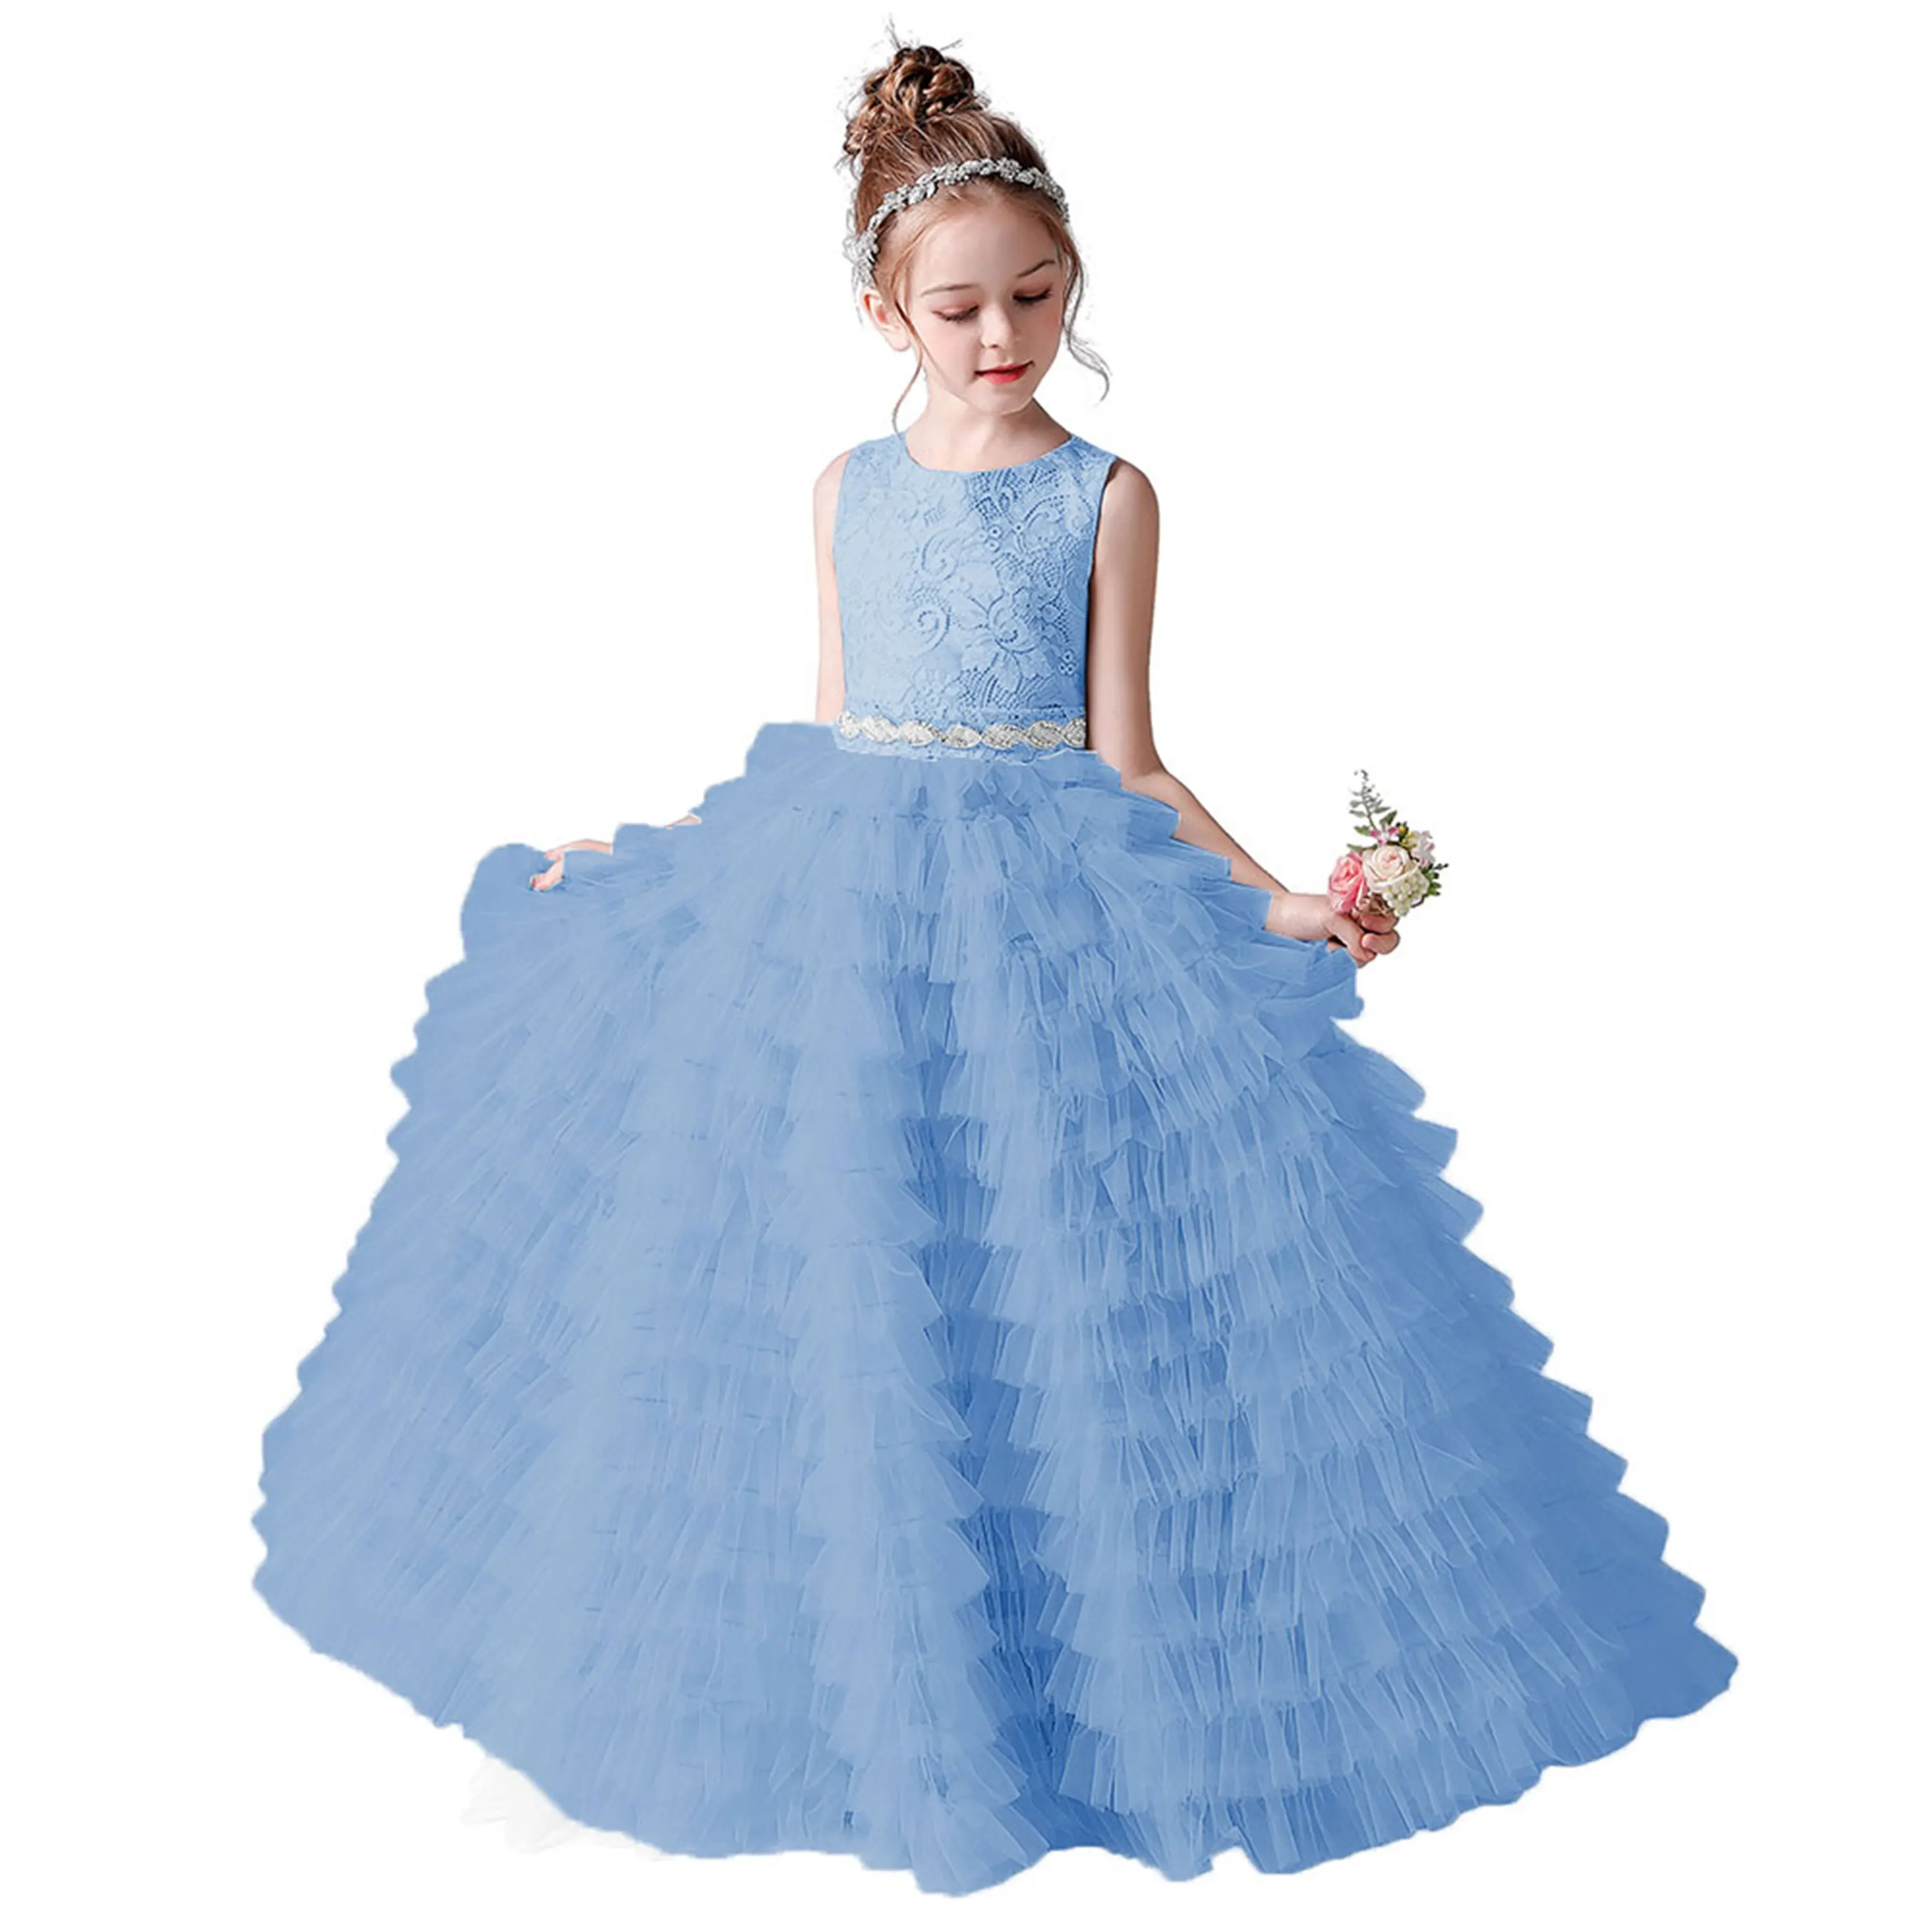 

Dideyttawl Tulle Princess Flower Girl Dresses For Birthday Party Lace Concert Junior Bridesmaid Gown Puff Skirt